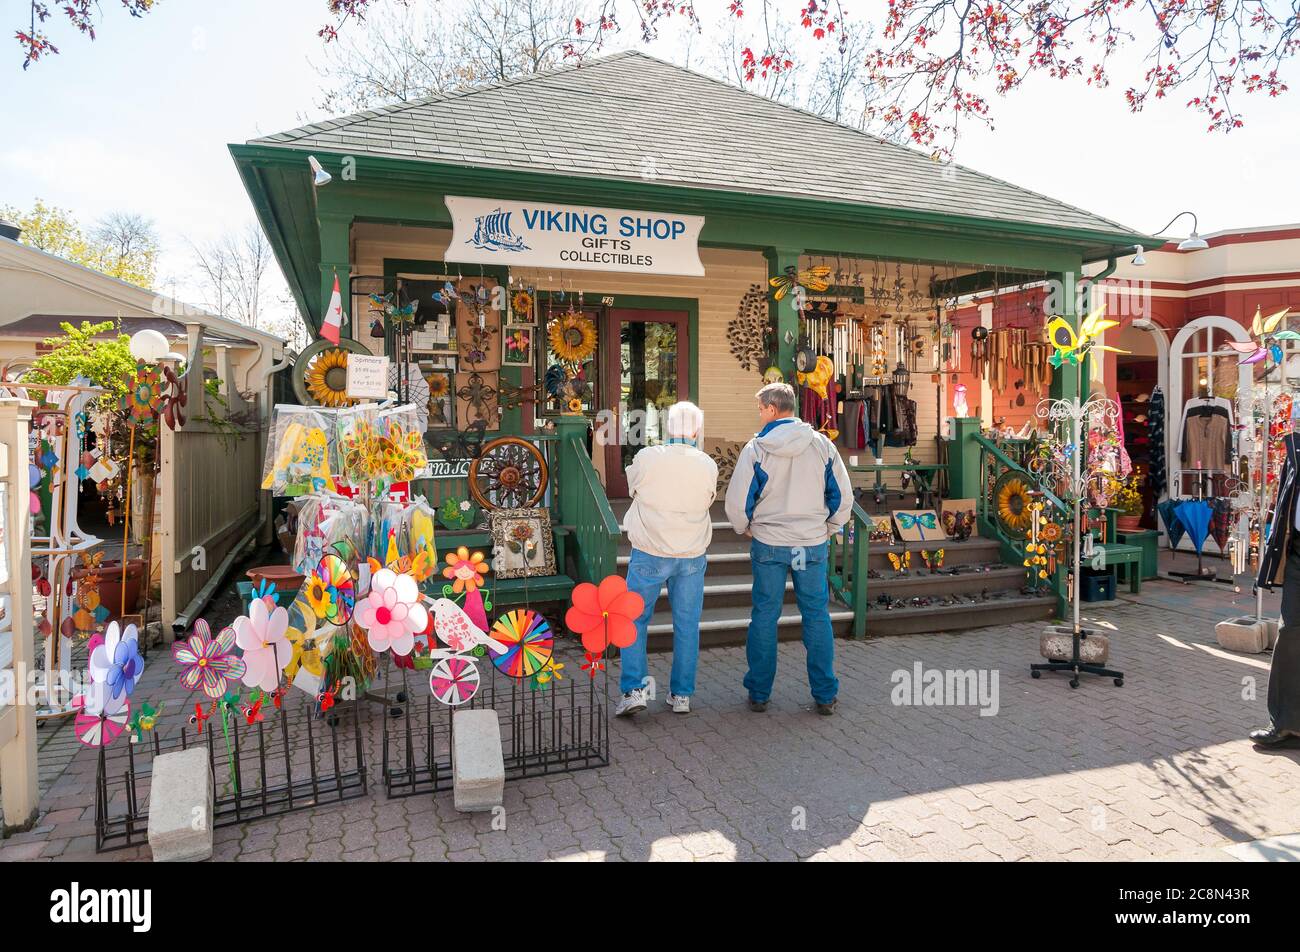 Niagara-on-the-Lake, Ontario, Canada - April 25, 2012: People visiting outdoor market with gifts shop in the center of Niagara-on-the-Lake, Canada Stock Photo